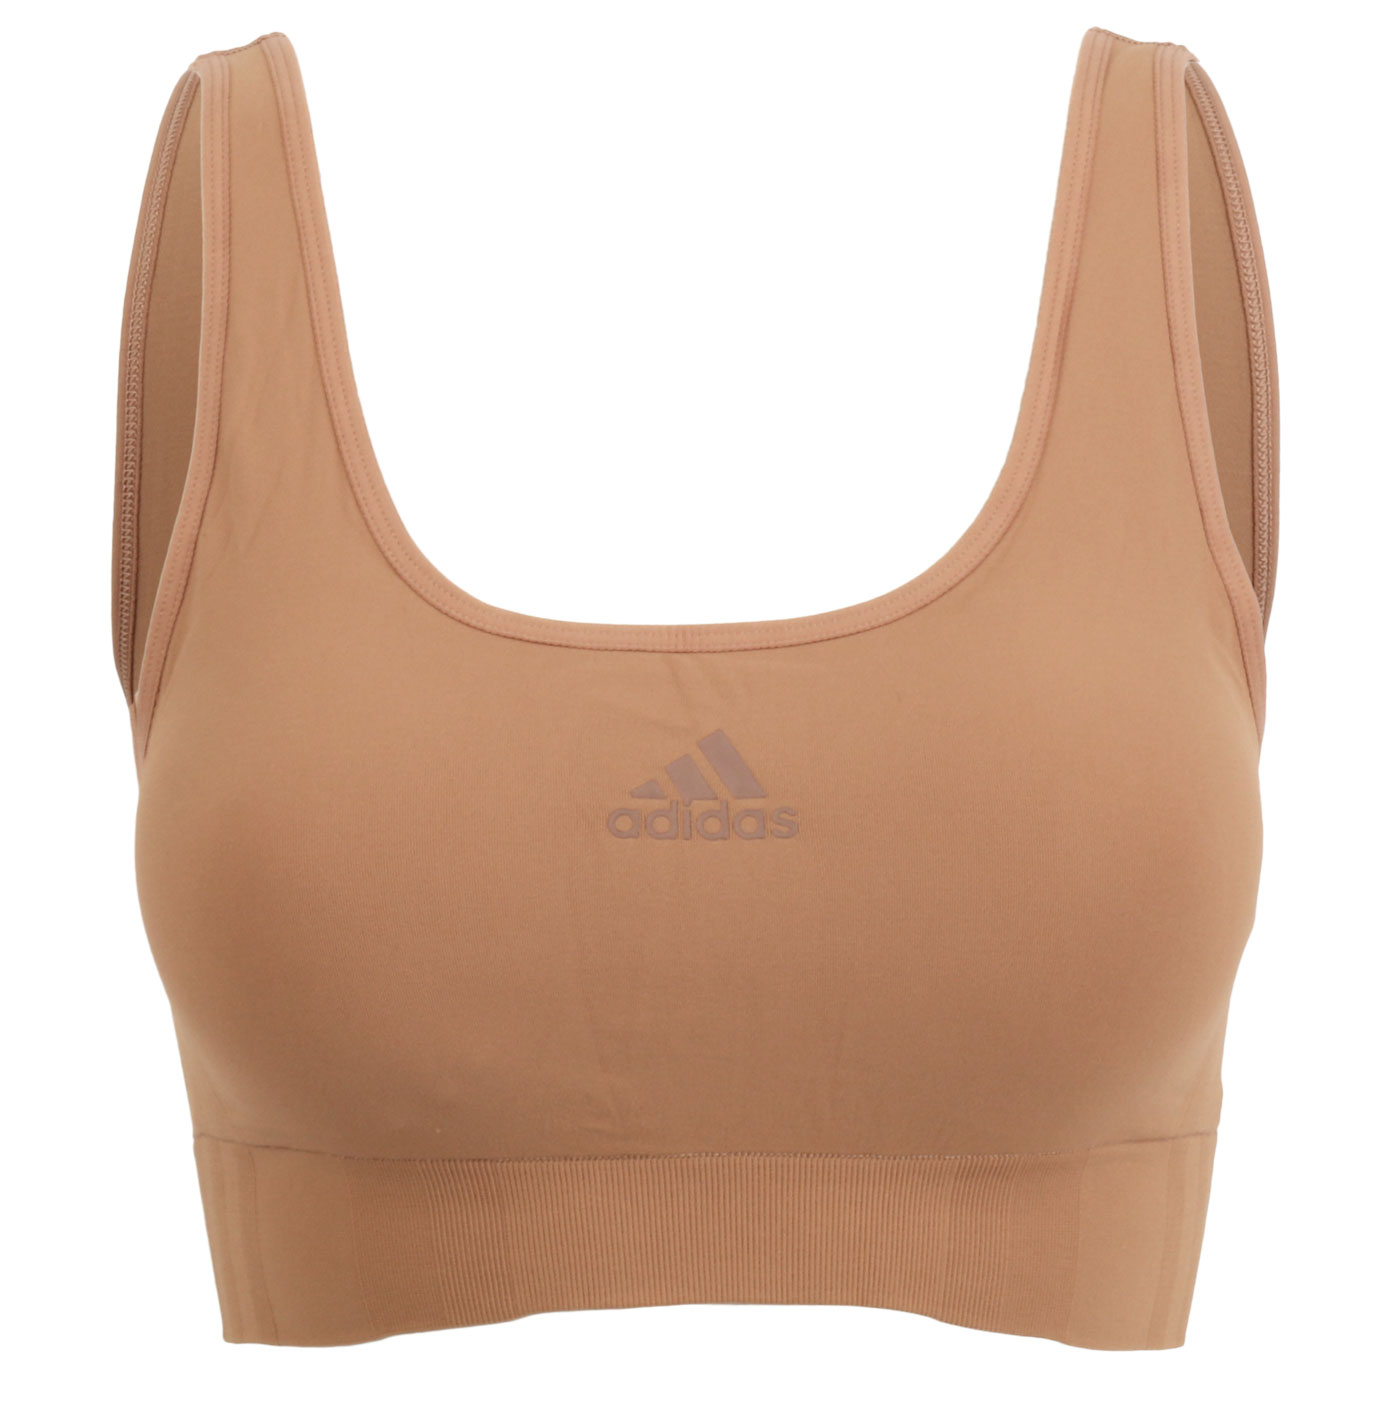 Picture of adidas Sports Underwear Seamless Scoop Lounge Bra Women - 301-toasted almond